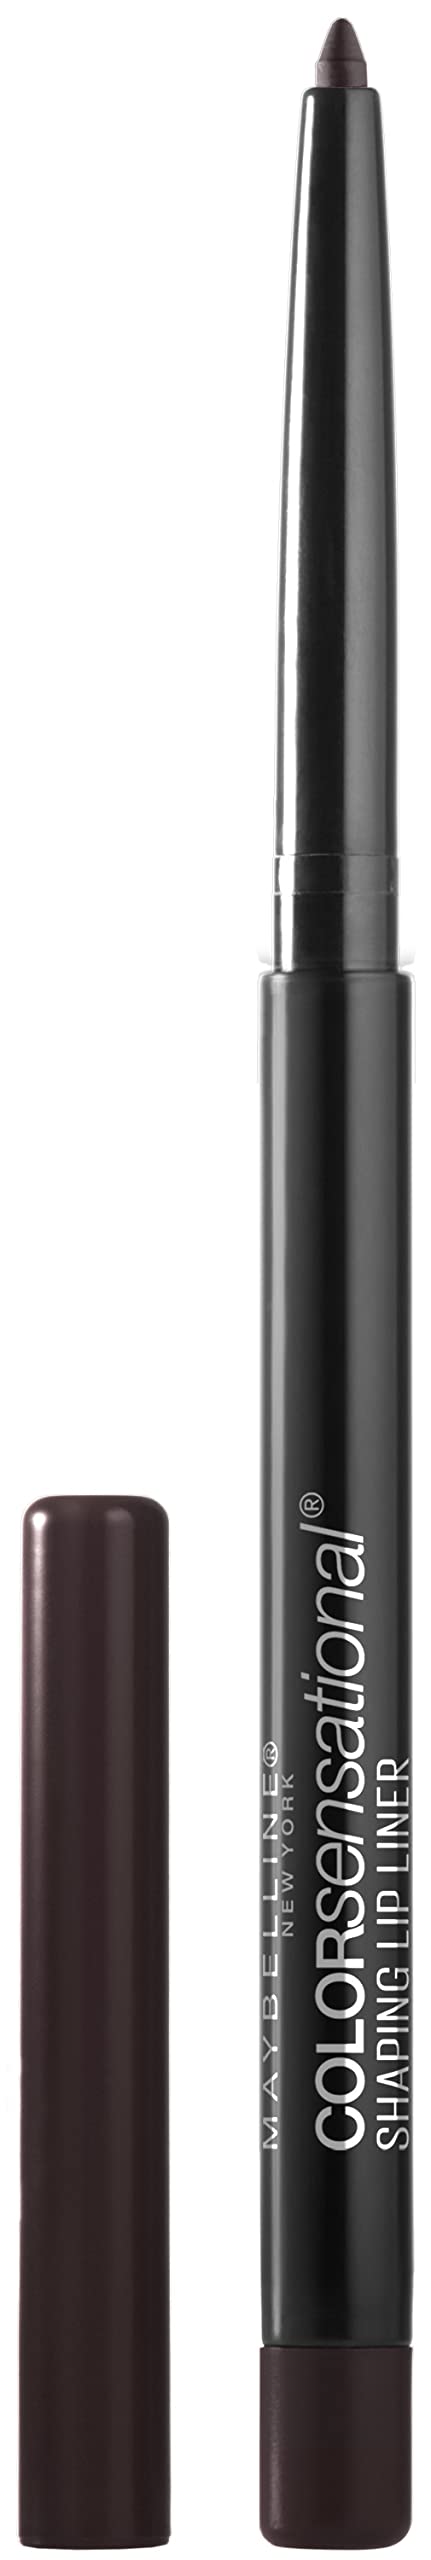 Maybelline Color Sensational Shaping Lip Liner w/ Self-Sharpening Tip (120 Rich Chocolate) $3.71 w/ S&S + Free Shipping w/ Prime or on $35+